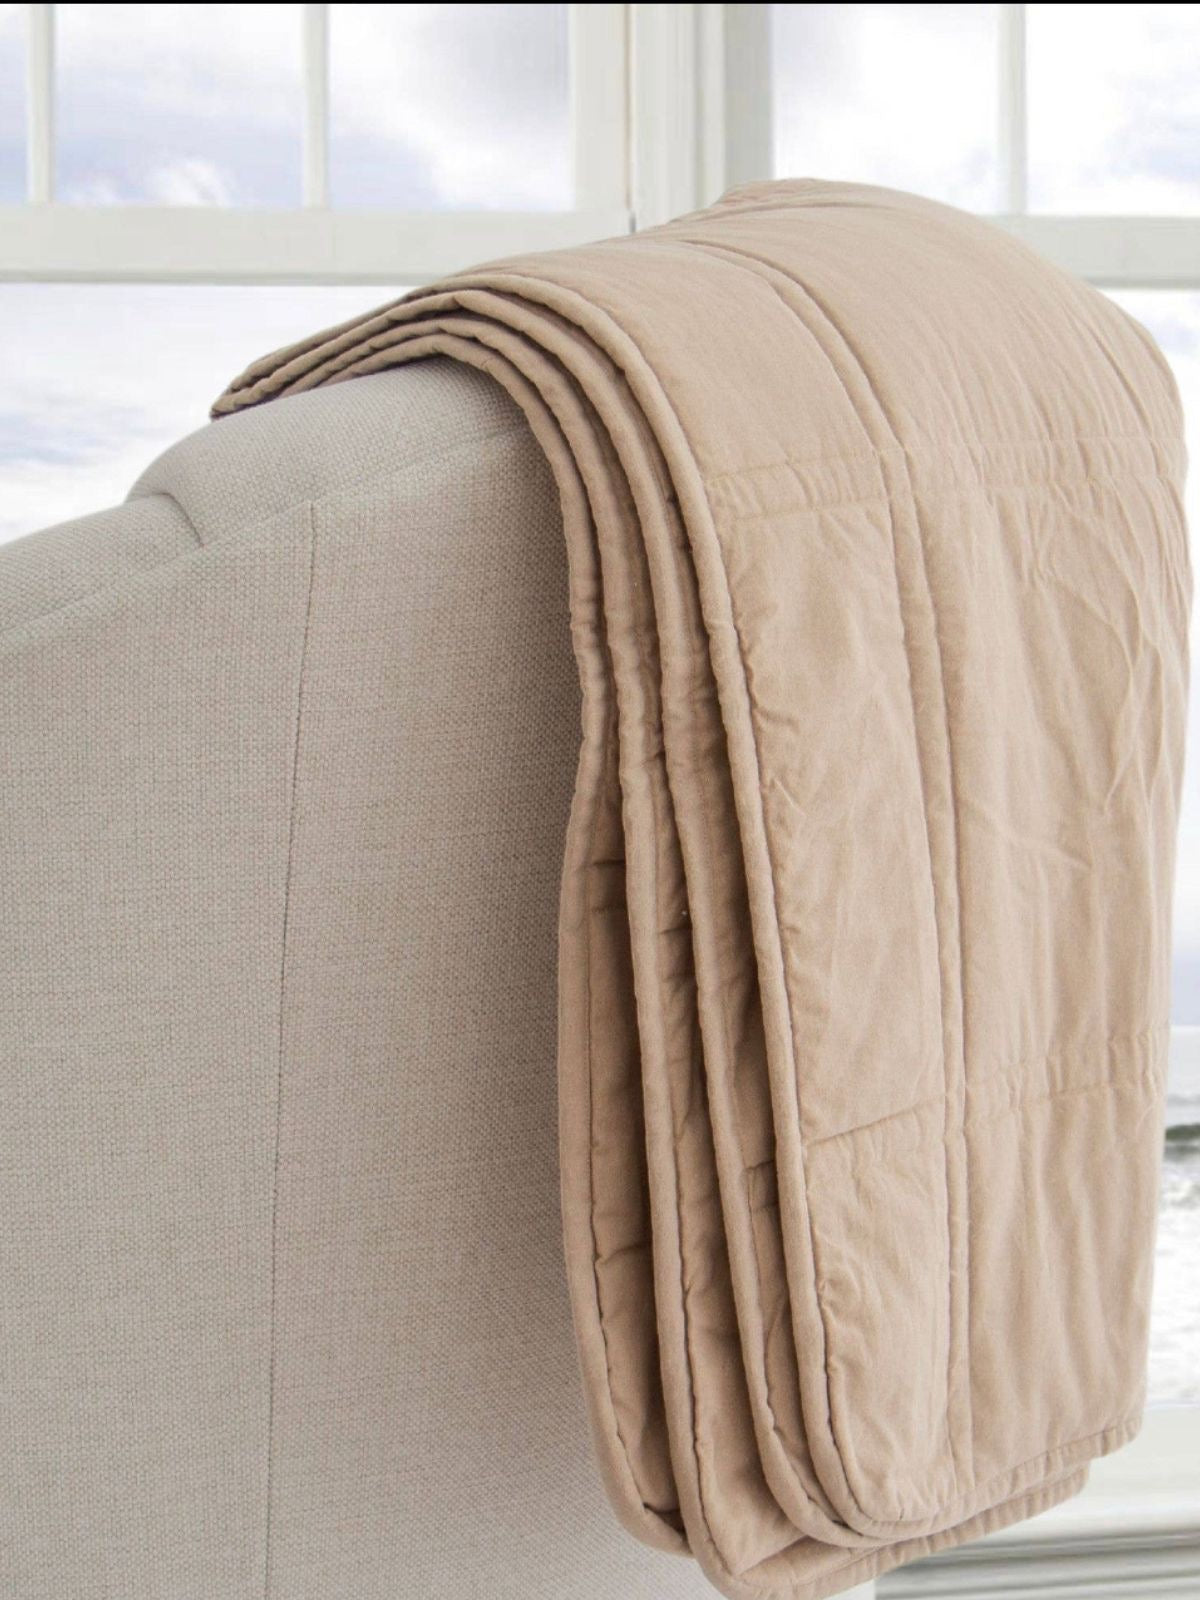 100% Matelasse Cotton Beach House Decorative Throw Blanket in Luxurious Greige Color, 50W x 60L.